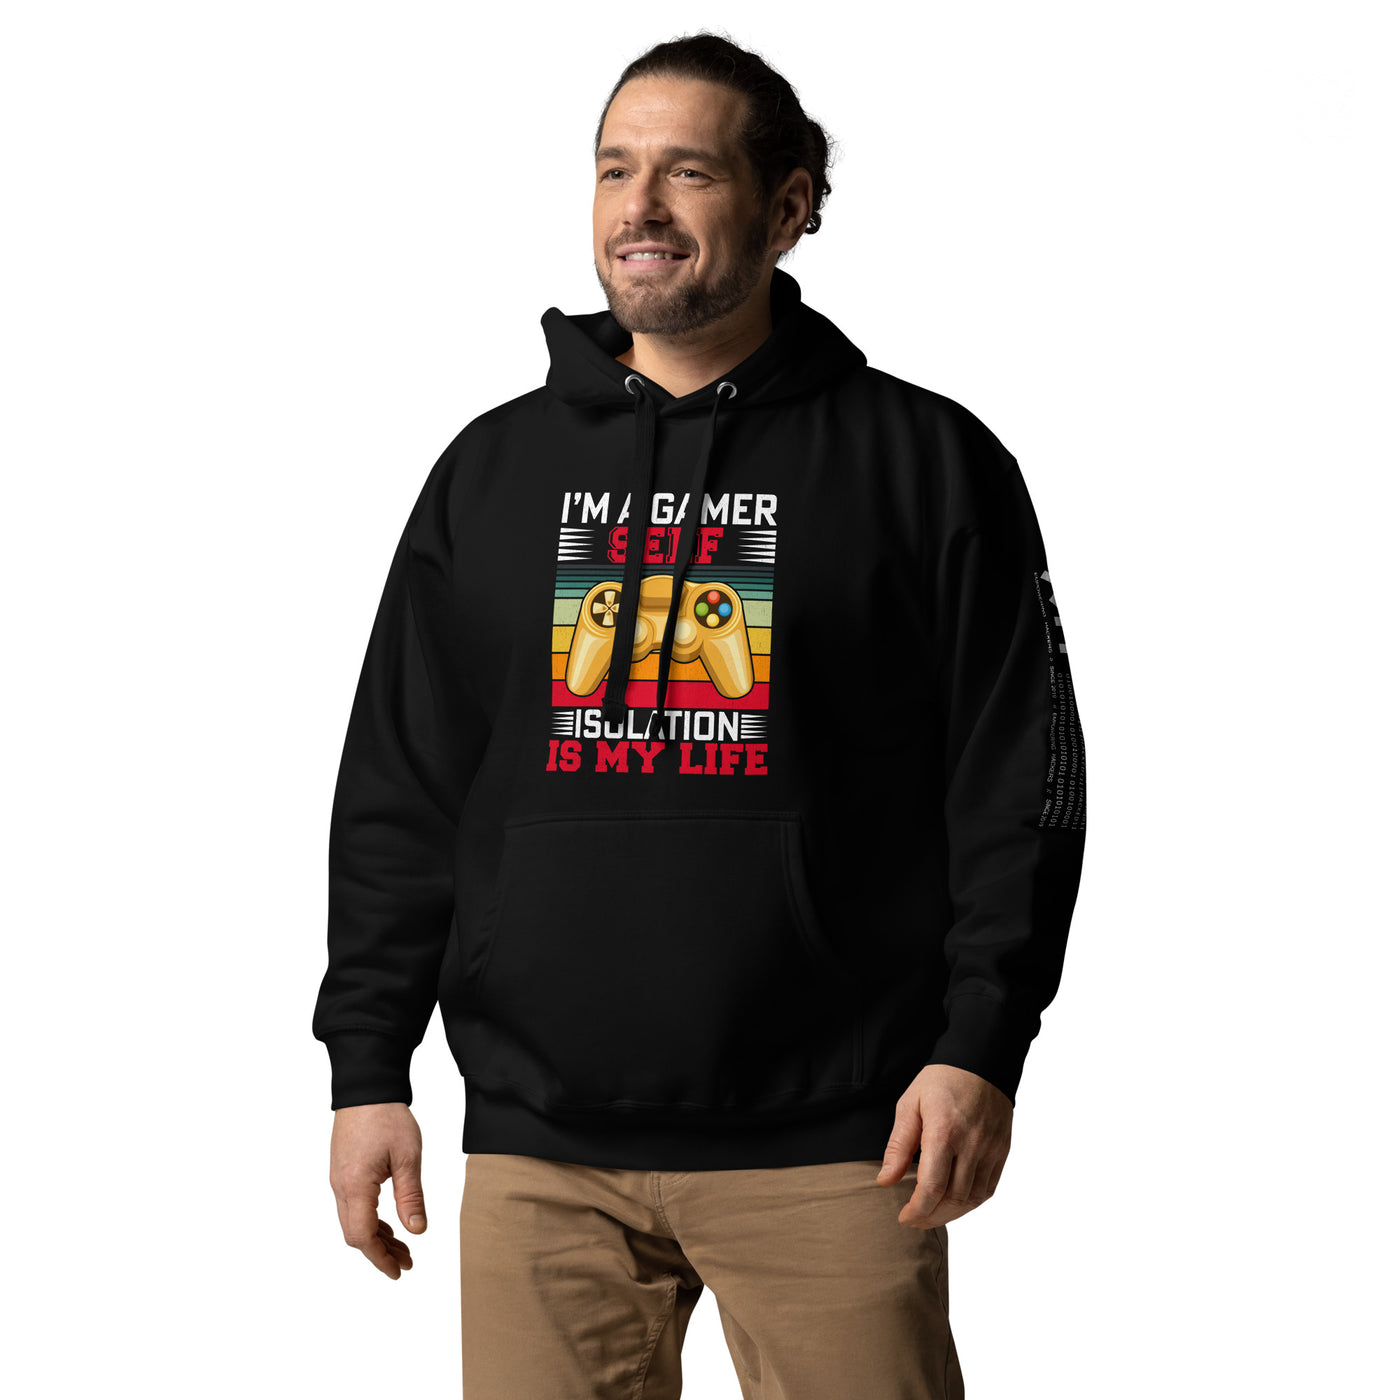 I am a Gamer; Self-isolation is my life - Unisex Hoodie